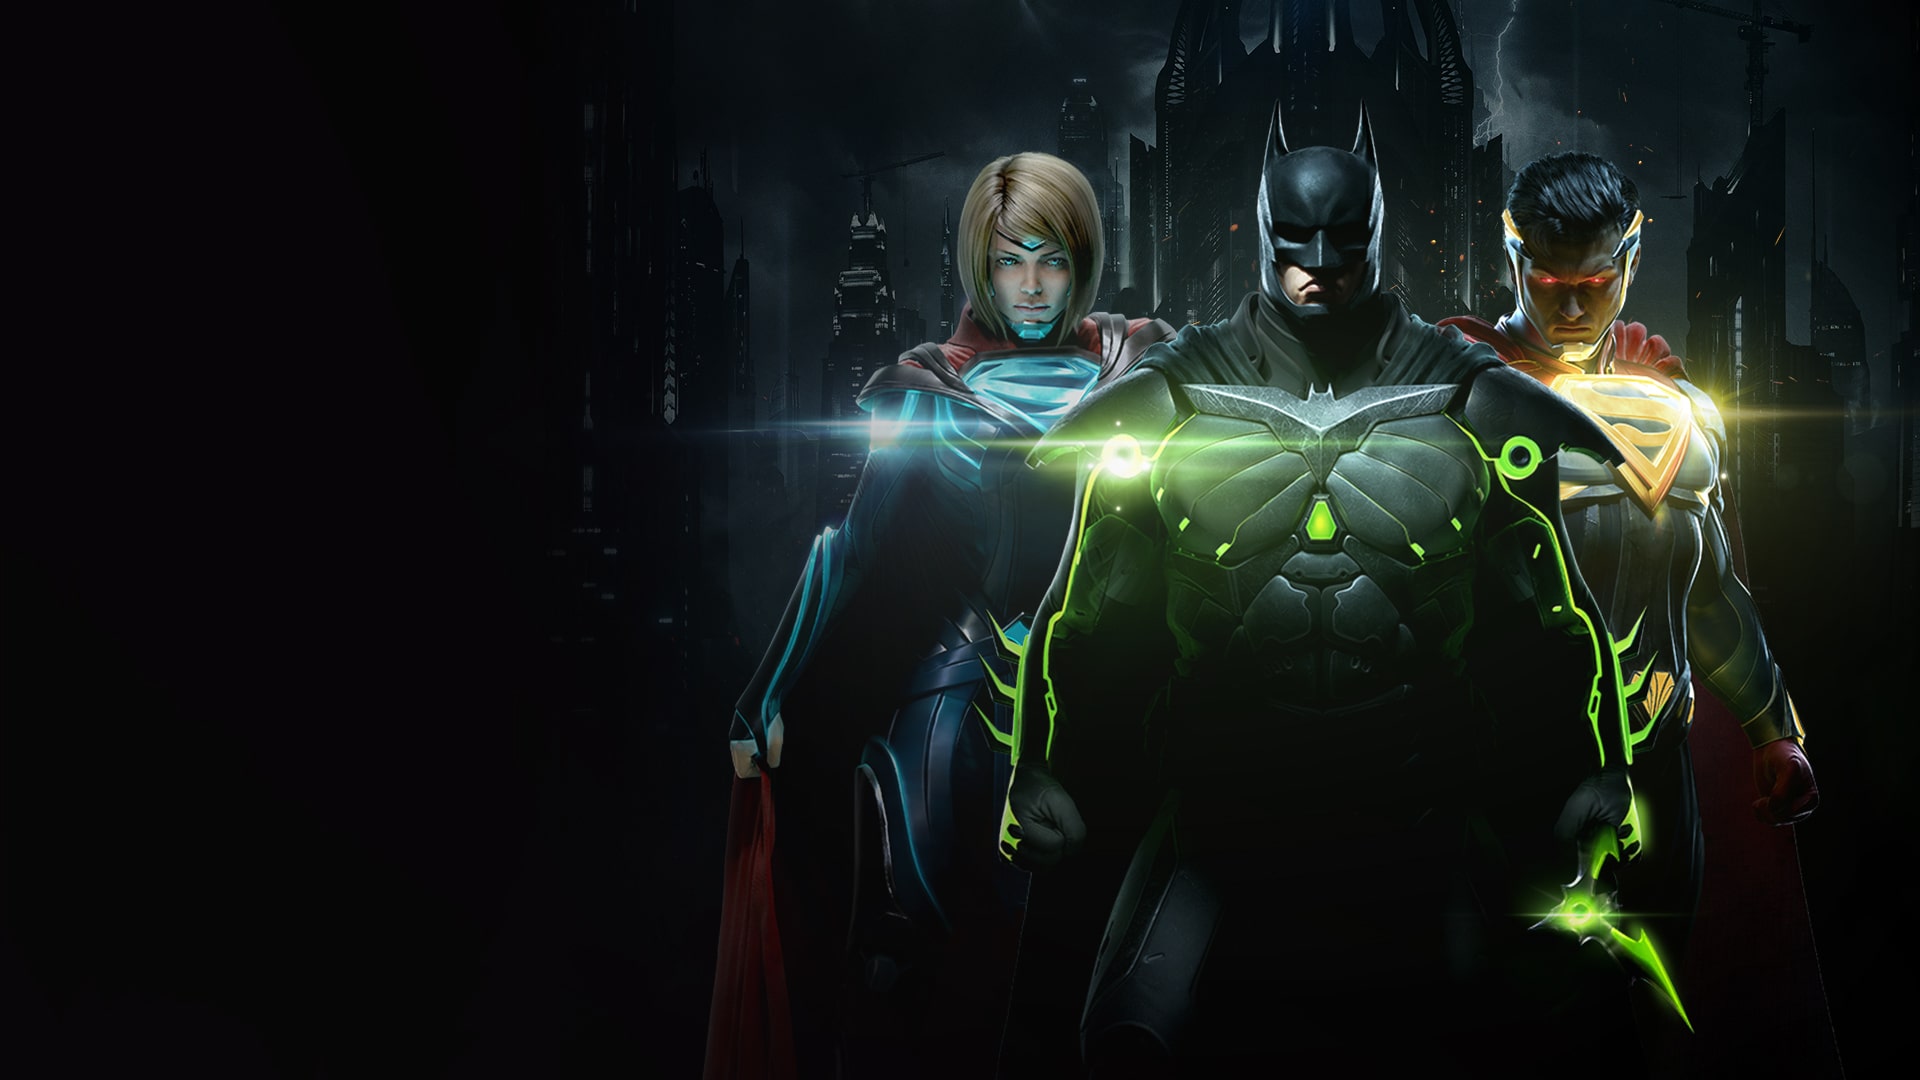 injustice 2 ps store